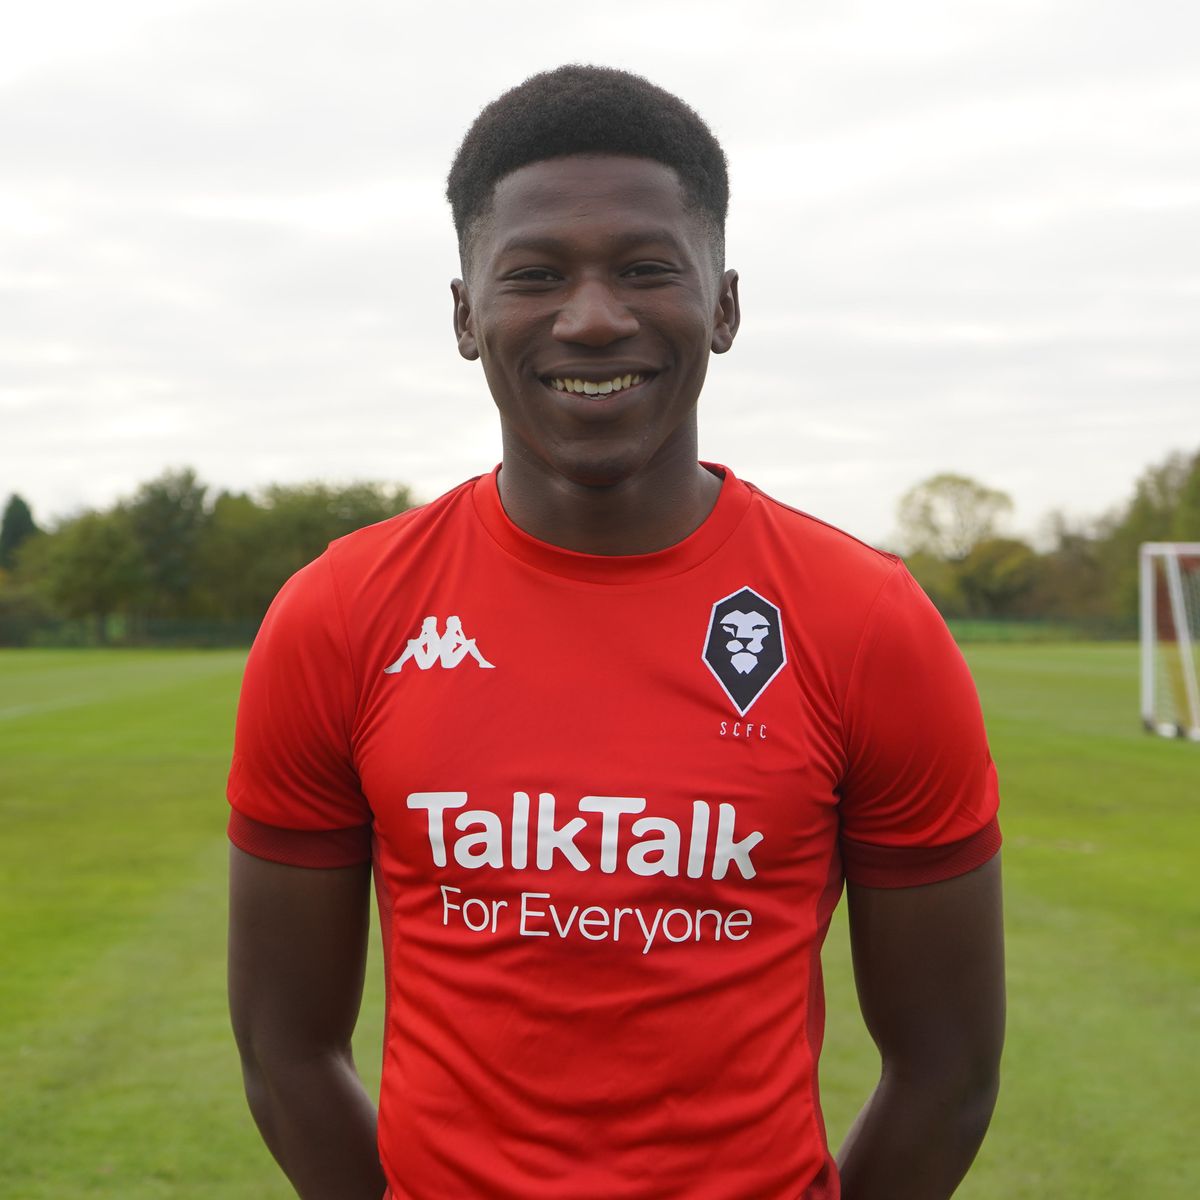 Di'Shon Bernard -Age: 20On loan at: Salford CityPosition - CBMatches played: 24 (22 starts)Goals scored: 2Assists: 2